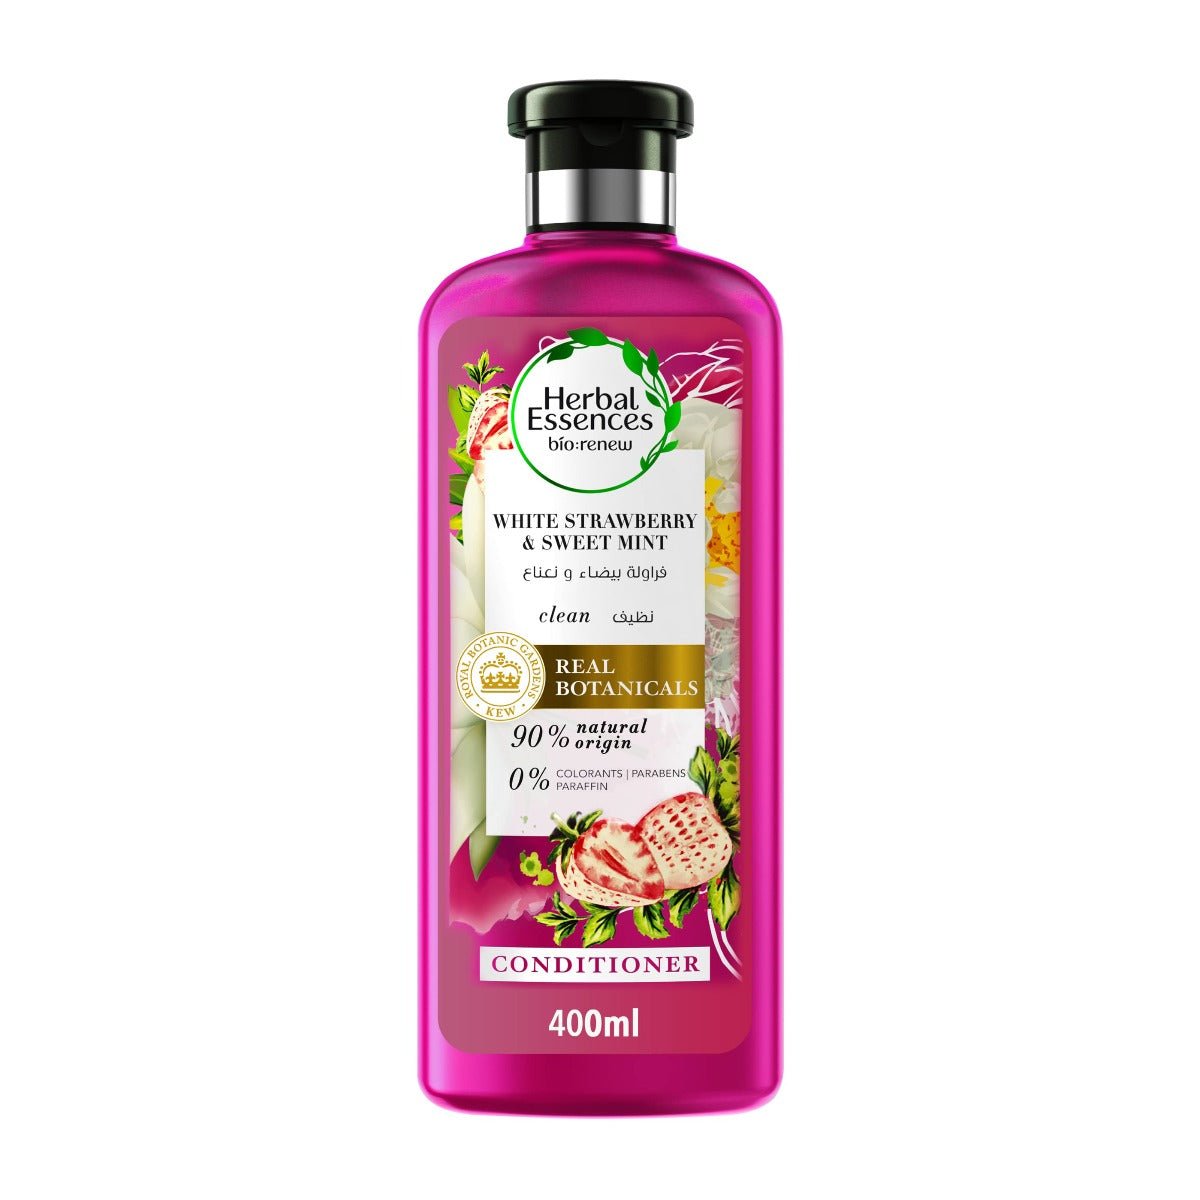 Herbal Essence White Strawberry & Sweet Mint Conditioner - 400ml - Bloom Pharmacy